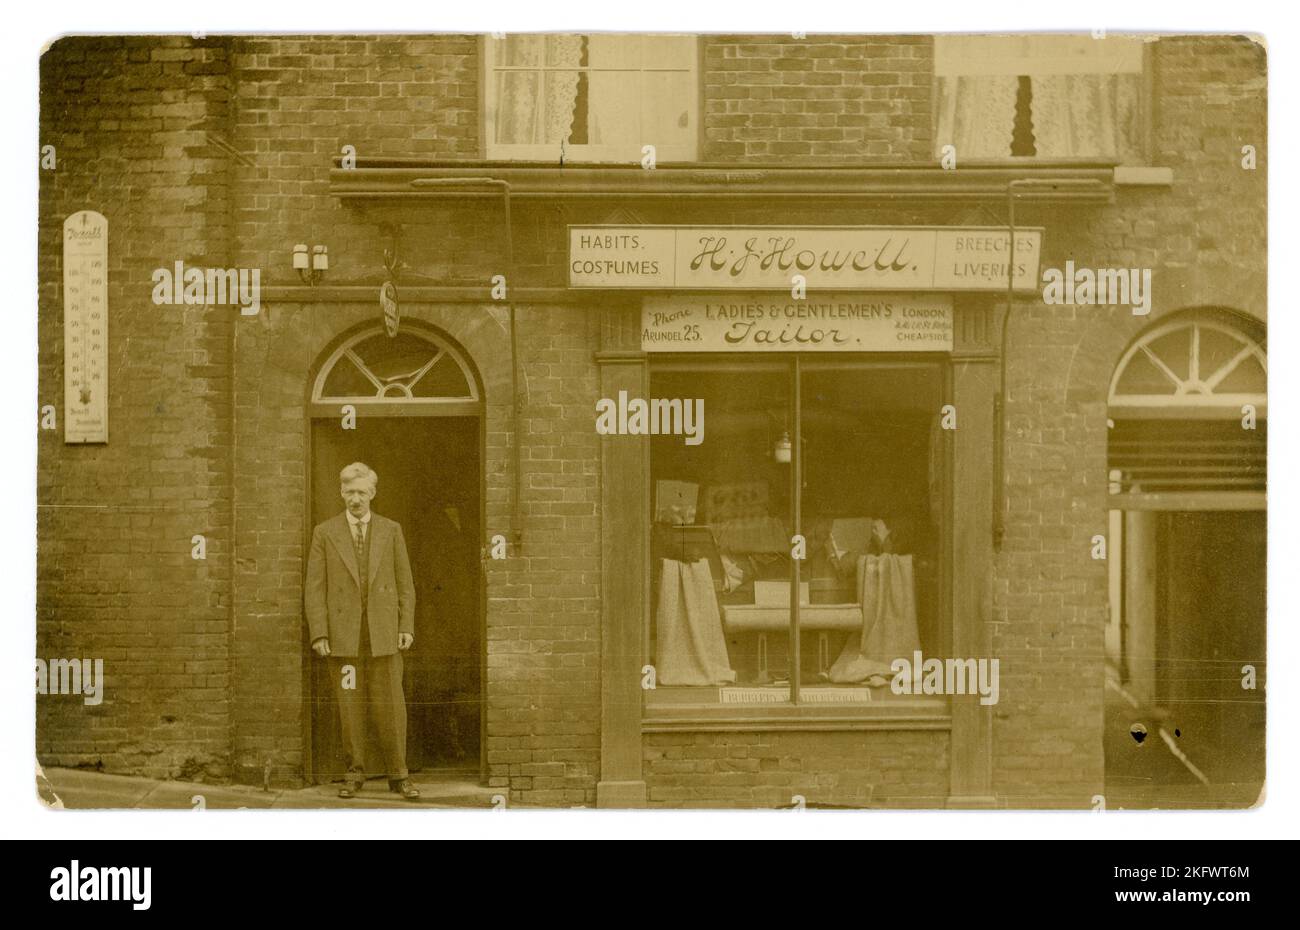 Original WW1 era postcard of smartly dressed proprietor / tailor, standing in doorway outside a boutique shop - there's a sign for Burberry waterproofs in the window and lengths of tweed. Sign above states H J Howell Ladies and Gents tailors & also advertising tailoring of 'Costumes, Habits., Breeches & Liveries'  The sign also advertises other premises at 11 Milk St Cheapside London. But there is a telephone exchange on the sign for Arundel 25 - so this shop is in the West Sussex seaside town of Arundel in the High Street - perhaps he retired here and kept the London shop. Circa 1917, U.K. Stock Photo